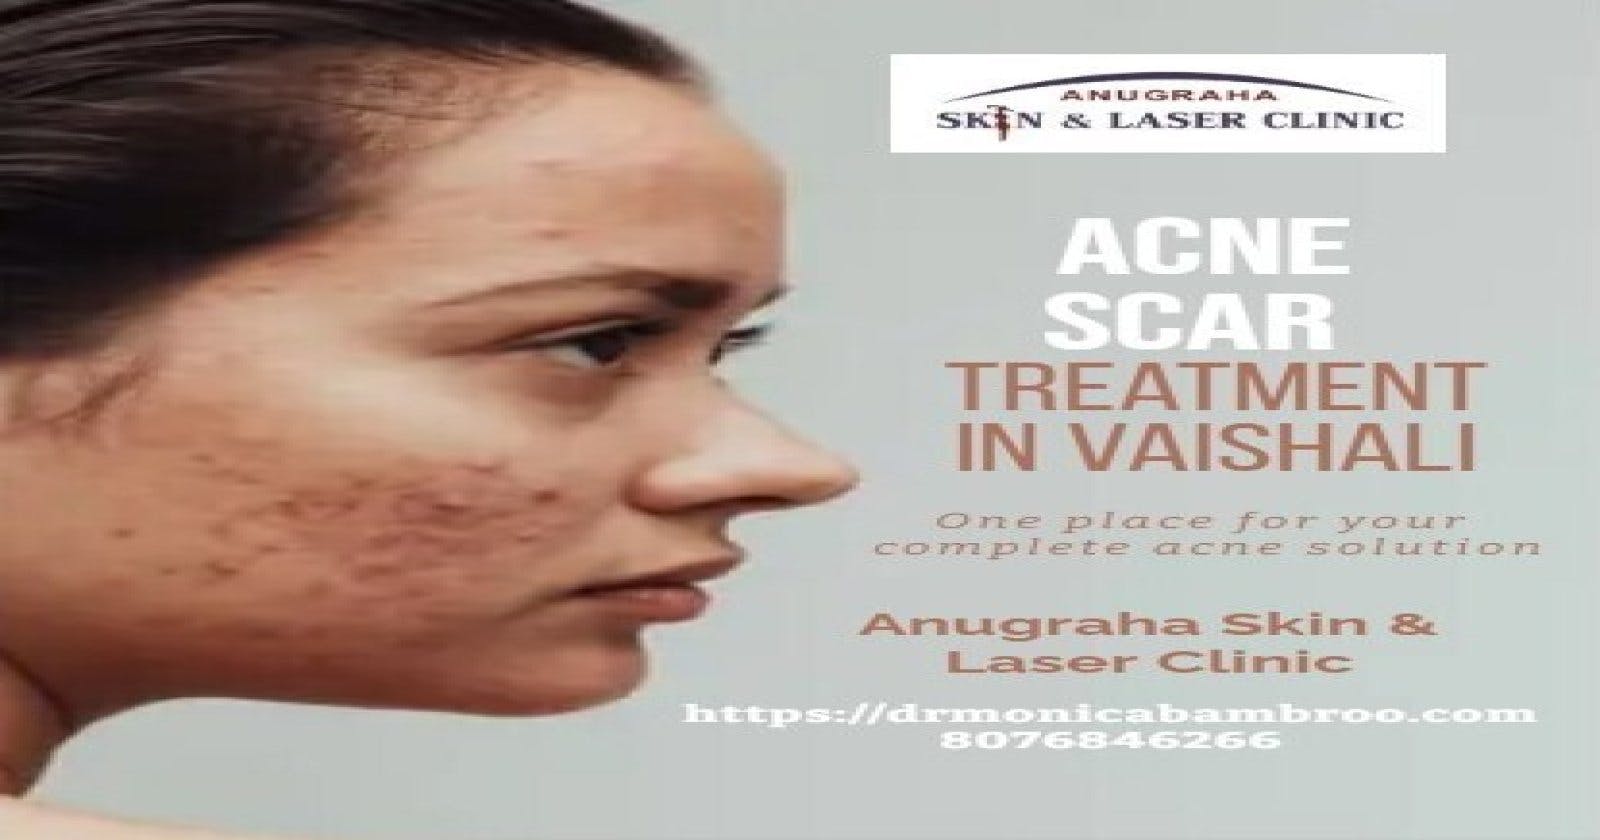 Revitalize Your Skin: Acne Scars Treatment in Vaishali and Stretch Mark Treatment in Indirapuram with  Dr. Monica Bambroo